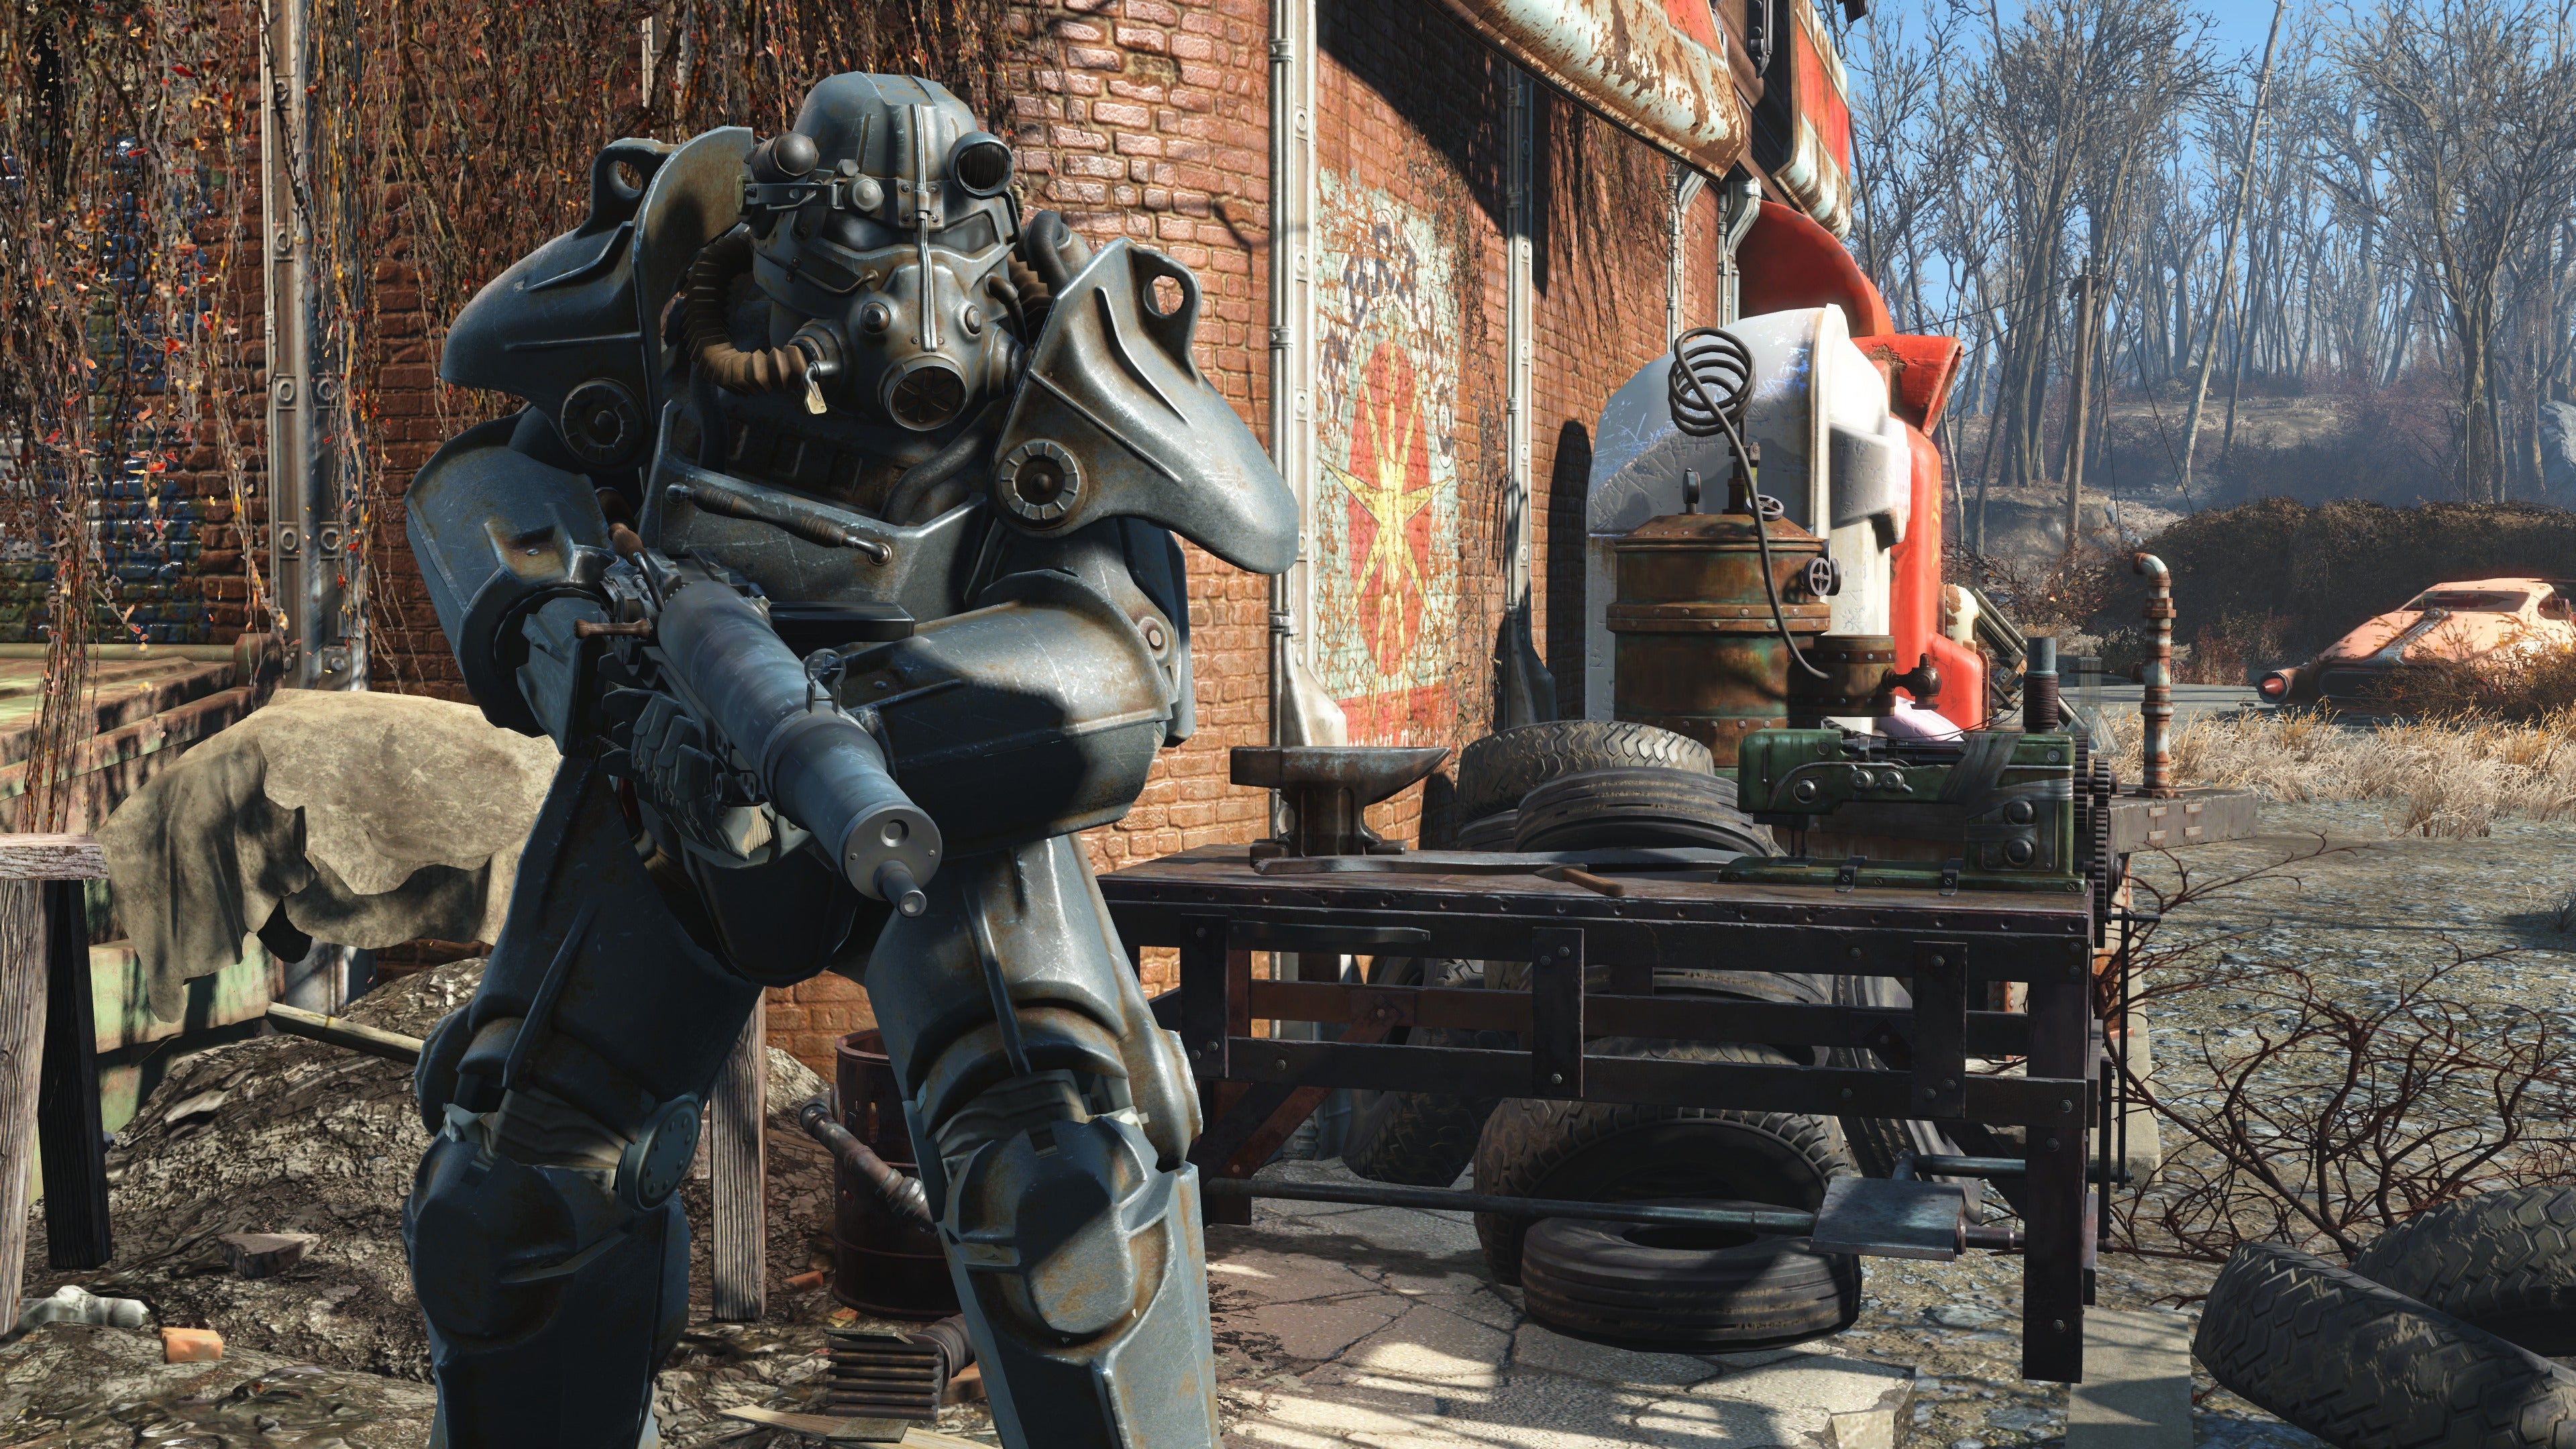 Fallout 4's free highresolution texture pack will make even the